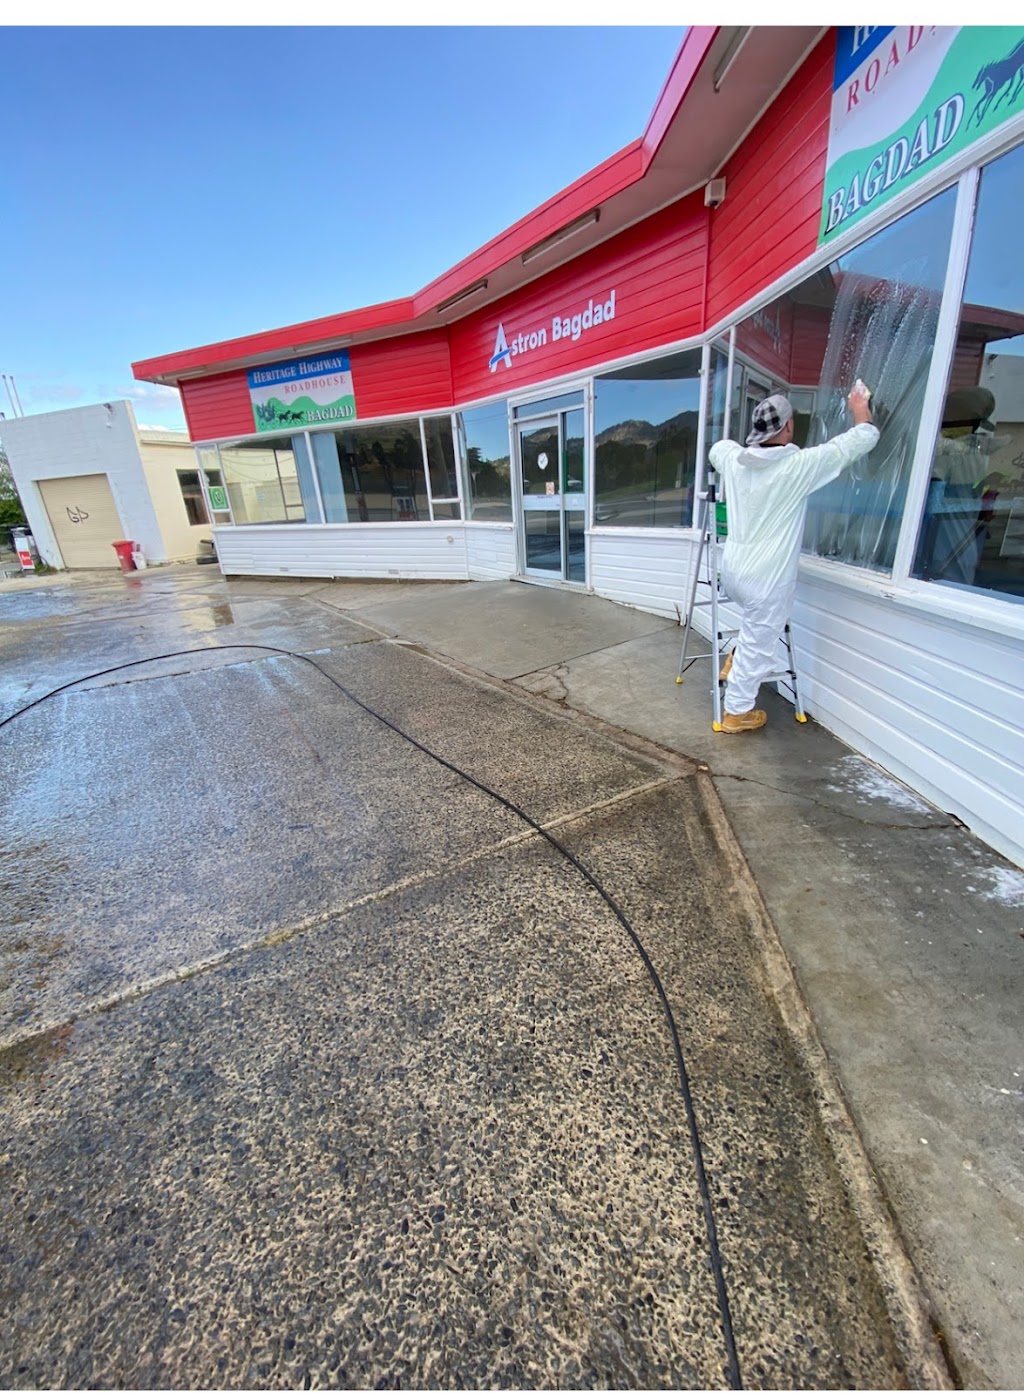 Shaggy Office cleaning and Commercial Cleaning Hobart | laundry | 45 Tasma St, North Hobart TAS 7018, Australia | 1800001126 OR +61 1800 001 126